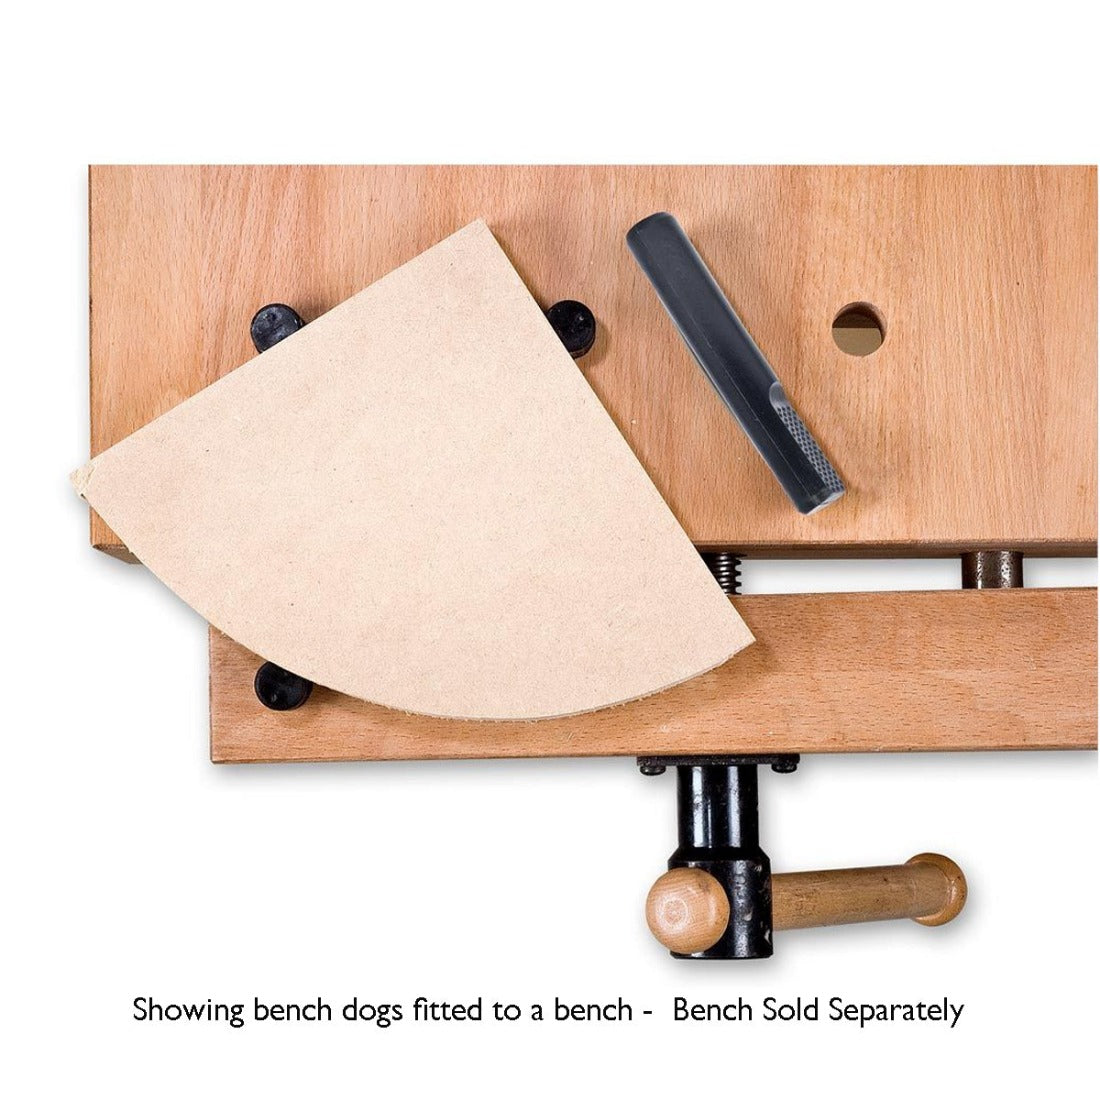 triangular shaped timber piece with one side as a curve being held on a bench with bench dogs. One bench dog in the vice, two on the bench  to hold the piece.